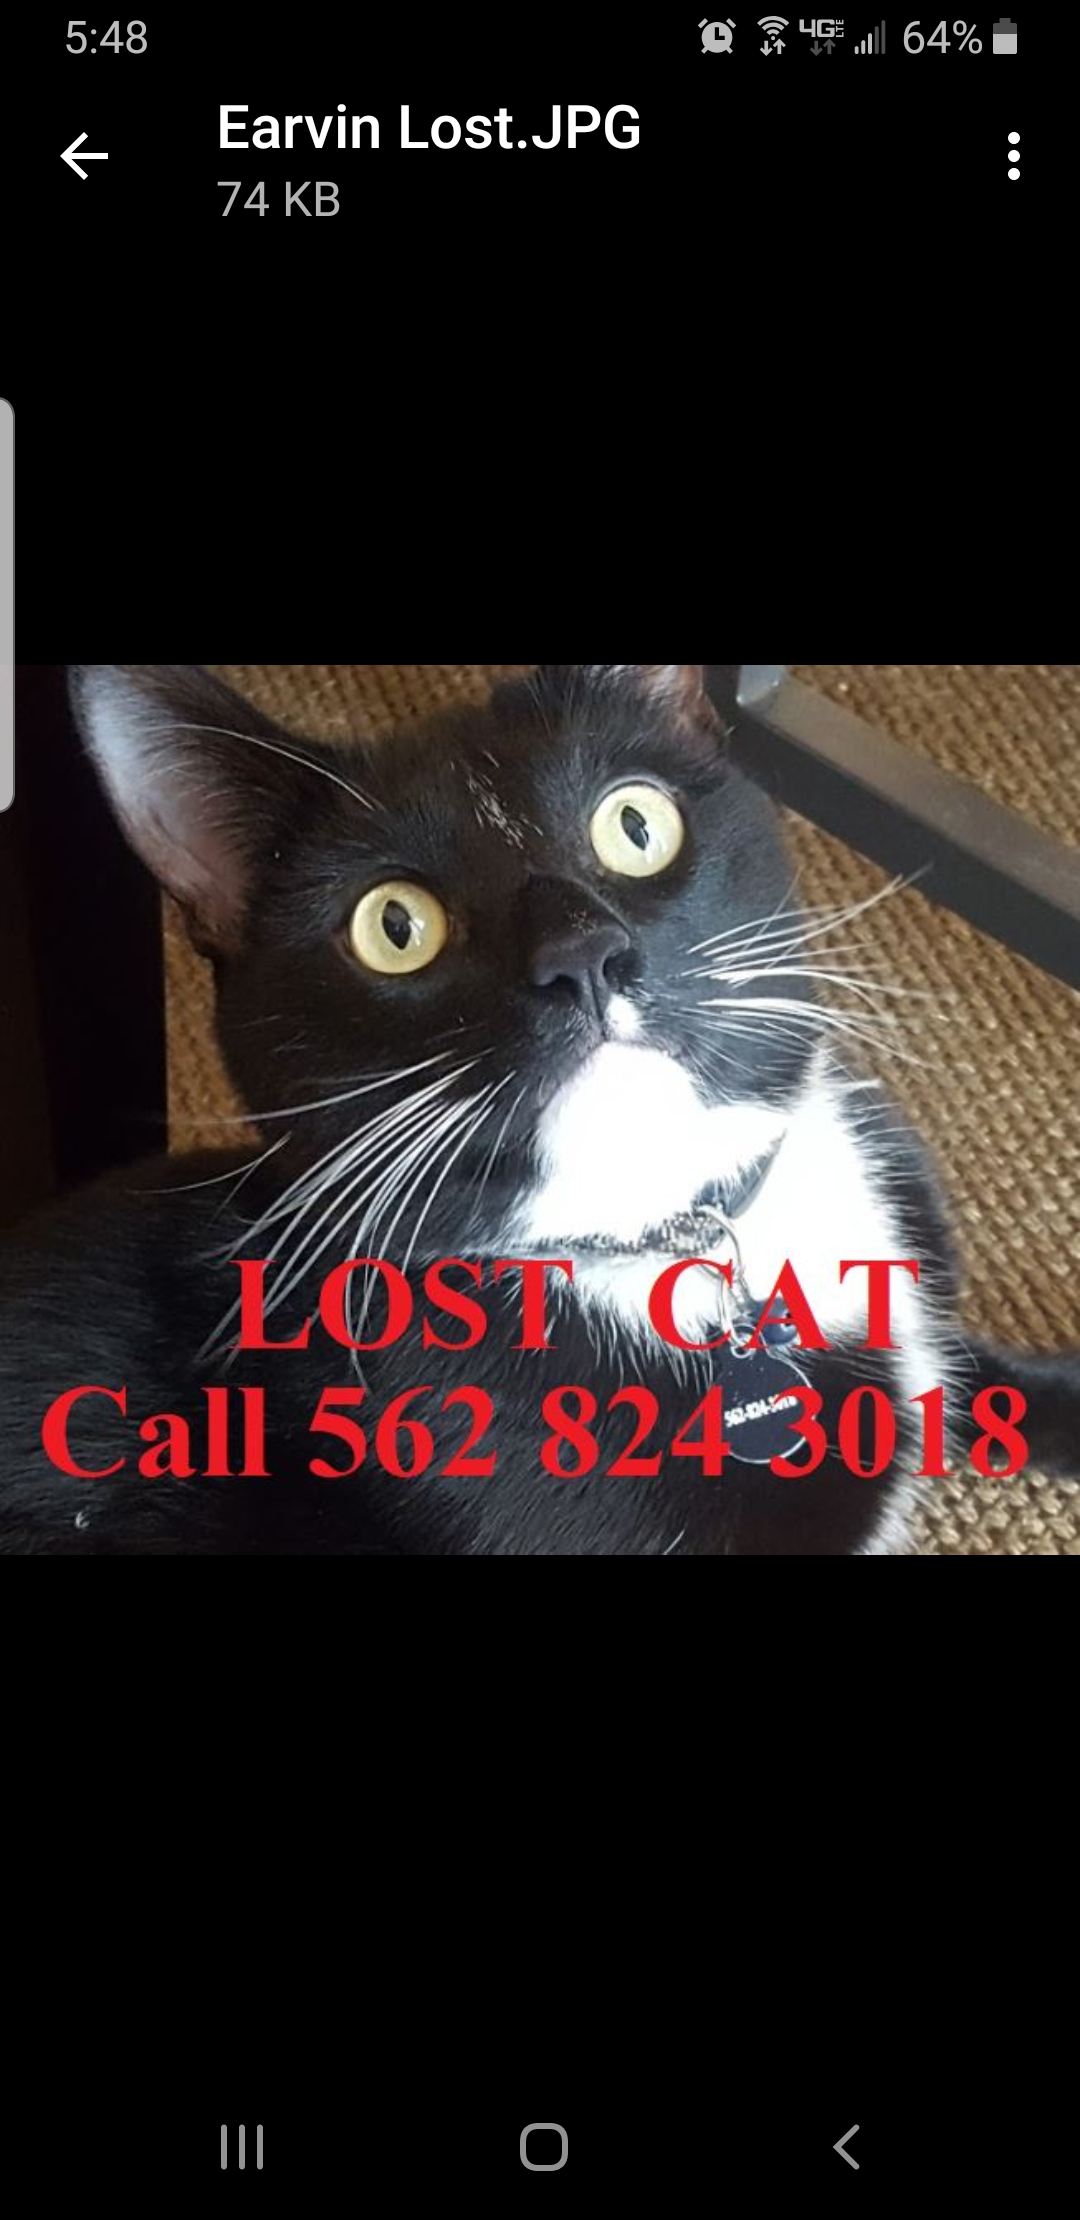 Image of Earvin, Lost Cat